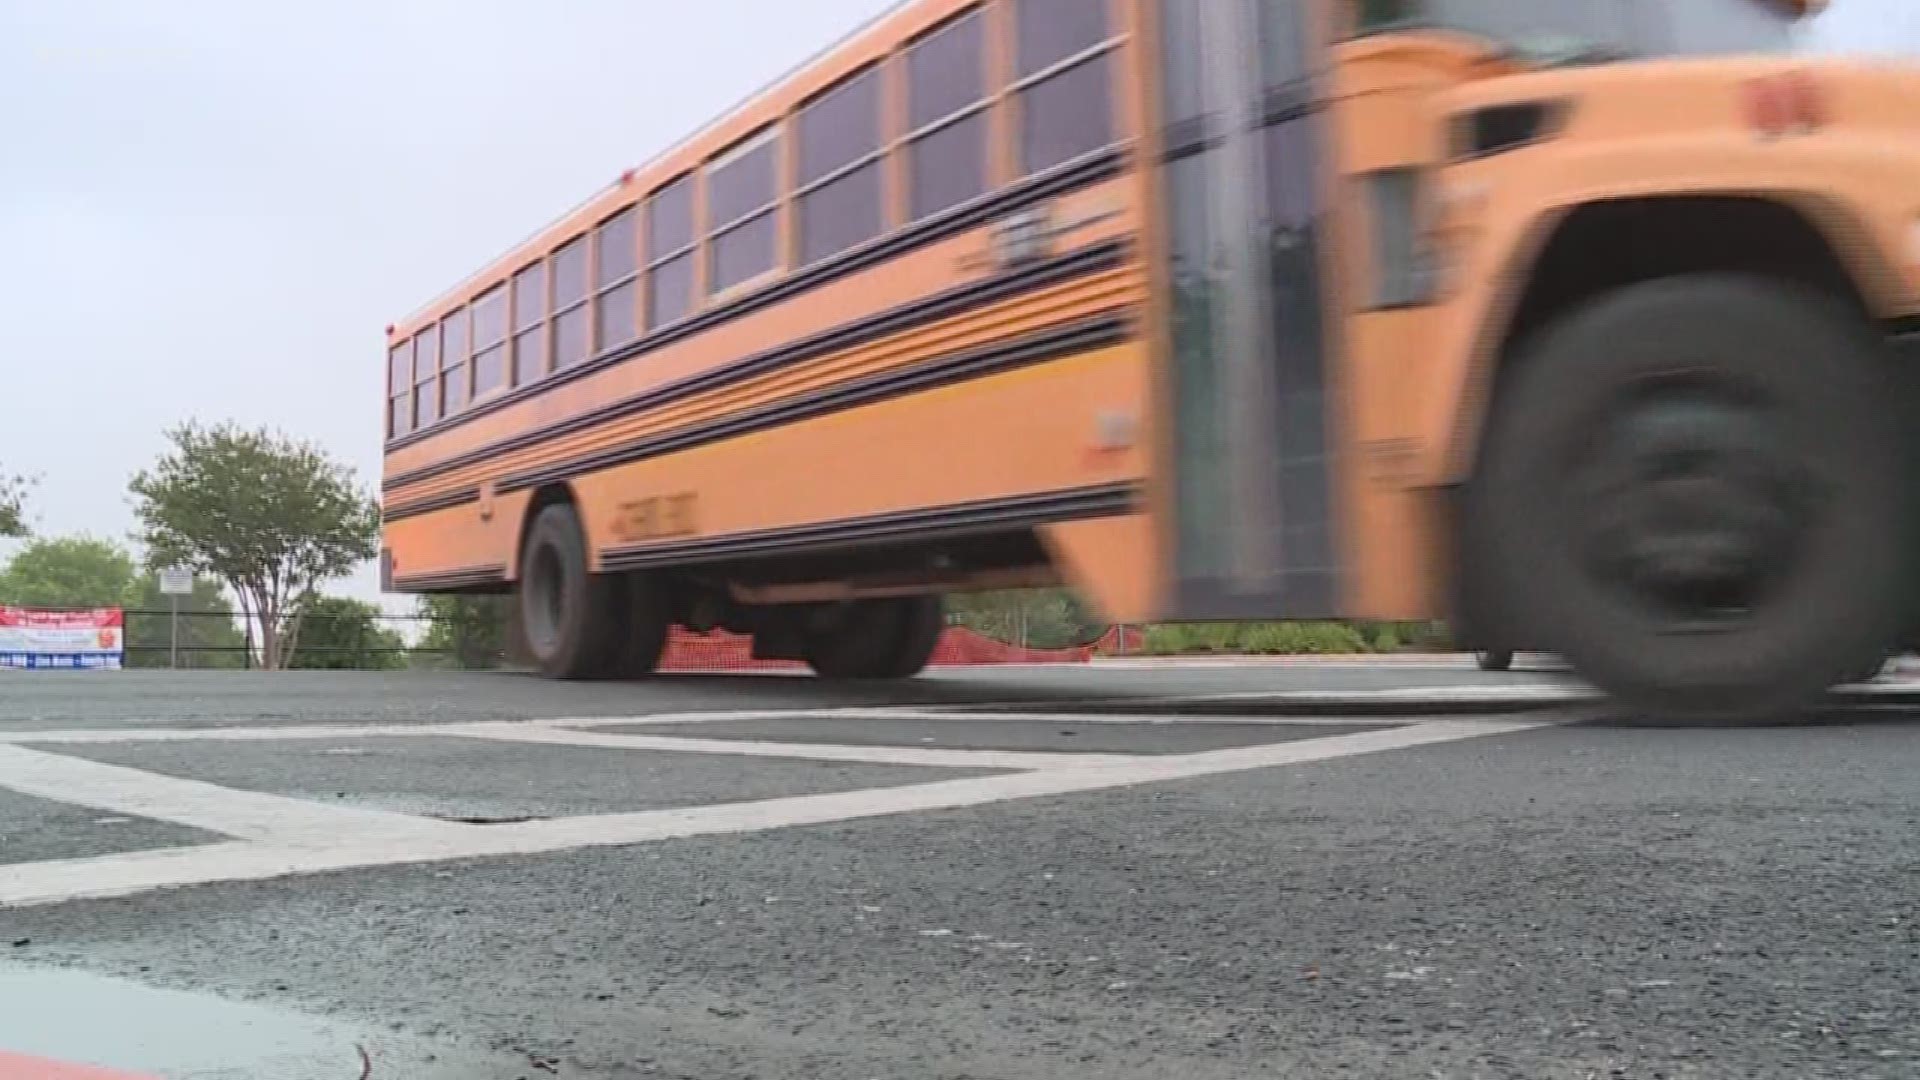 School bus passing rules for drivers